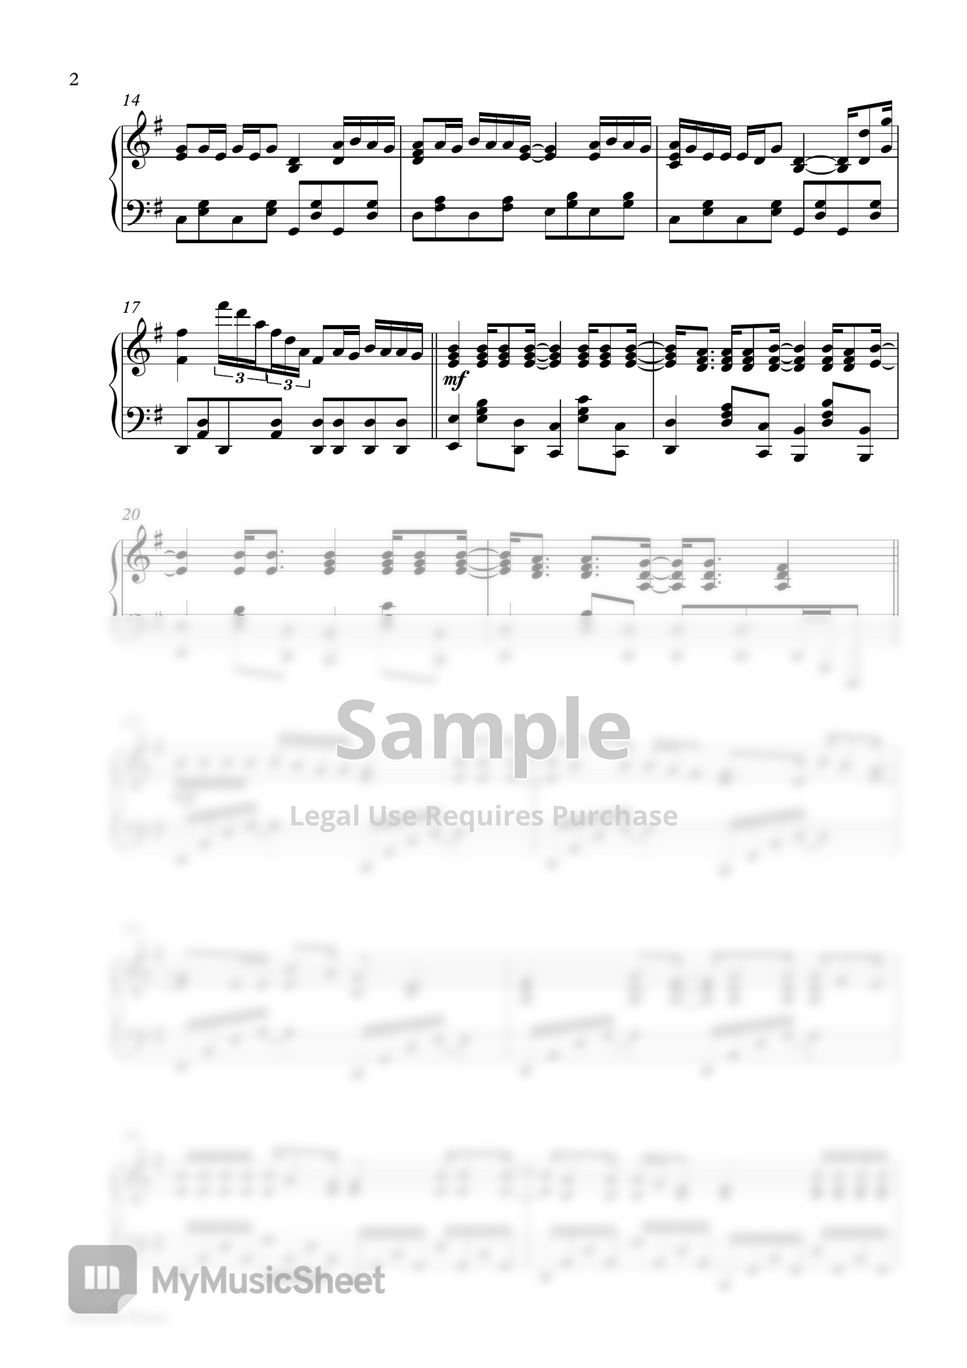 Passenger - Let Her Go (Piano Sheet) by Pianella Piano